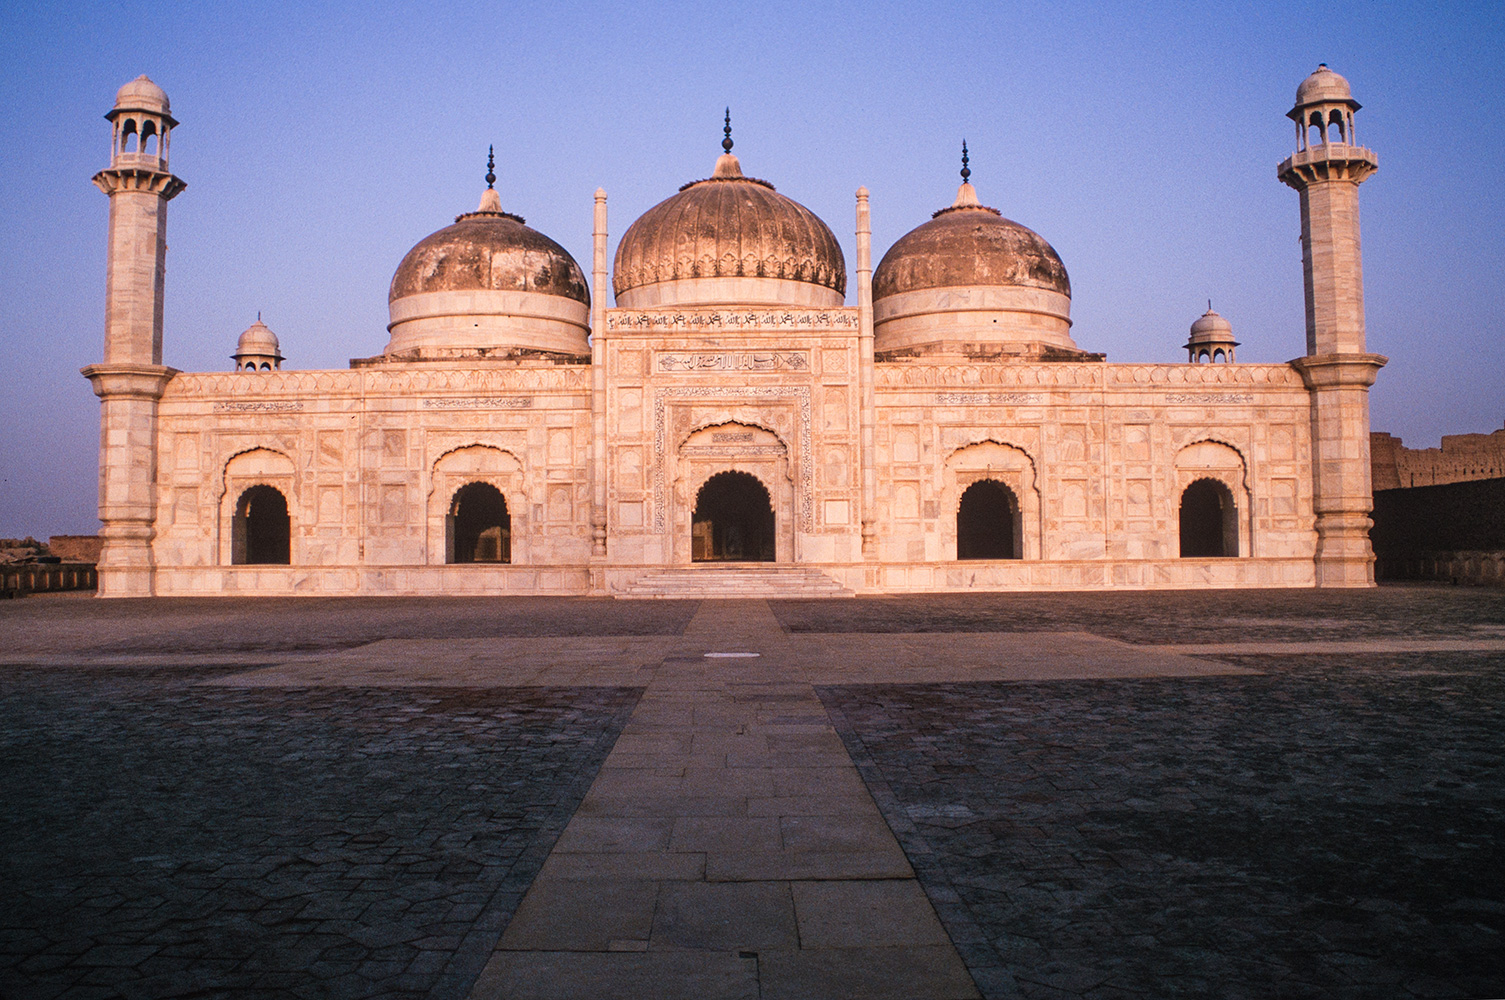 The mosque at sunrise